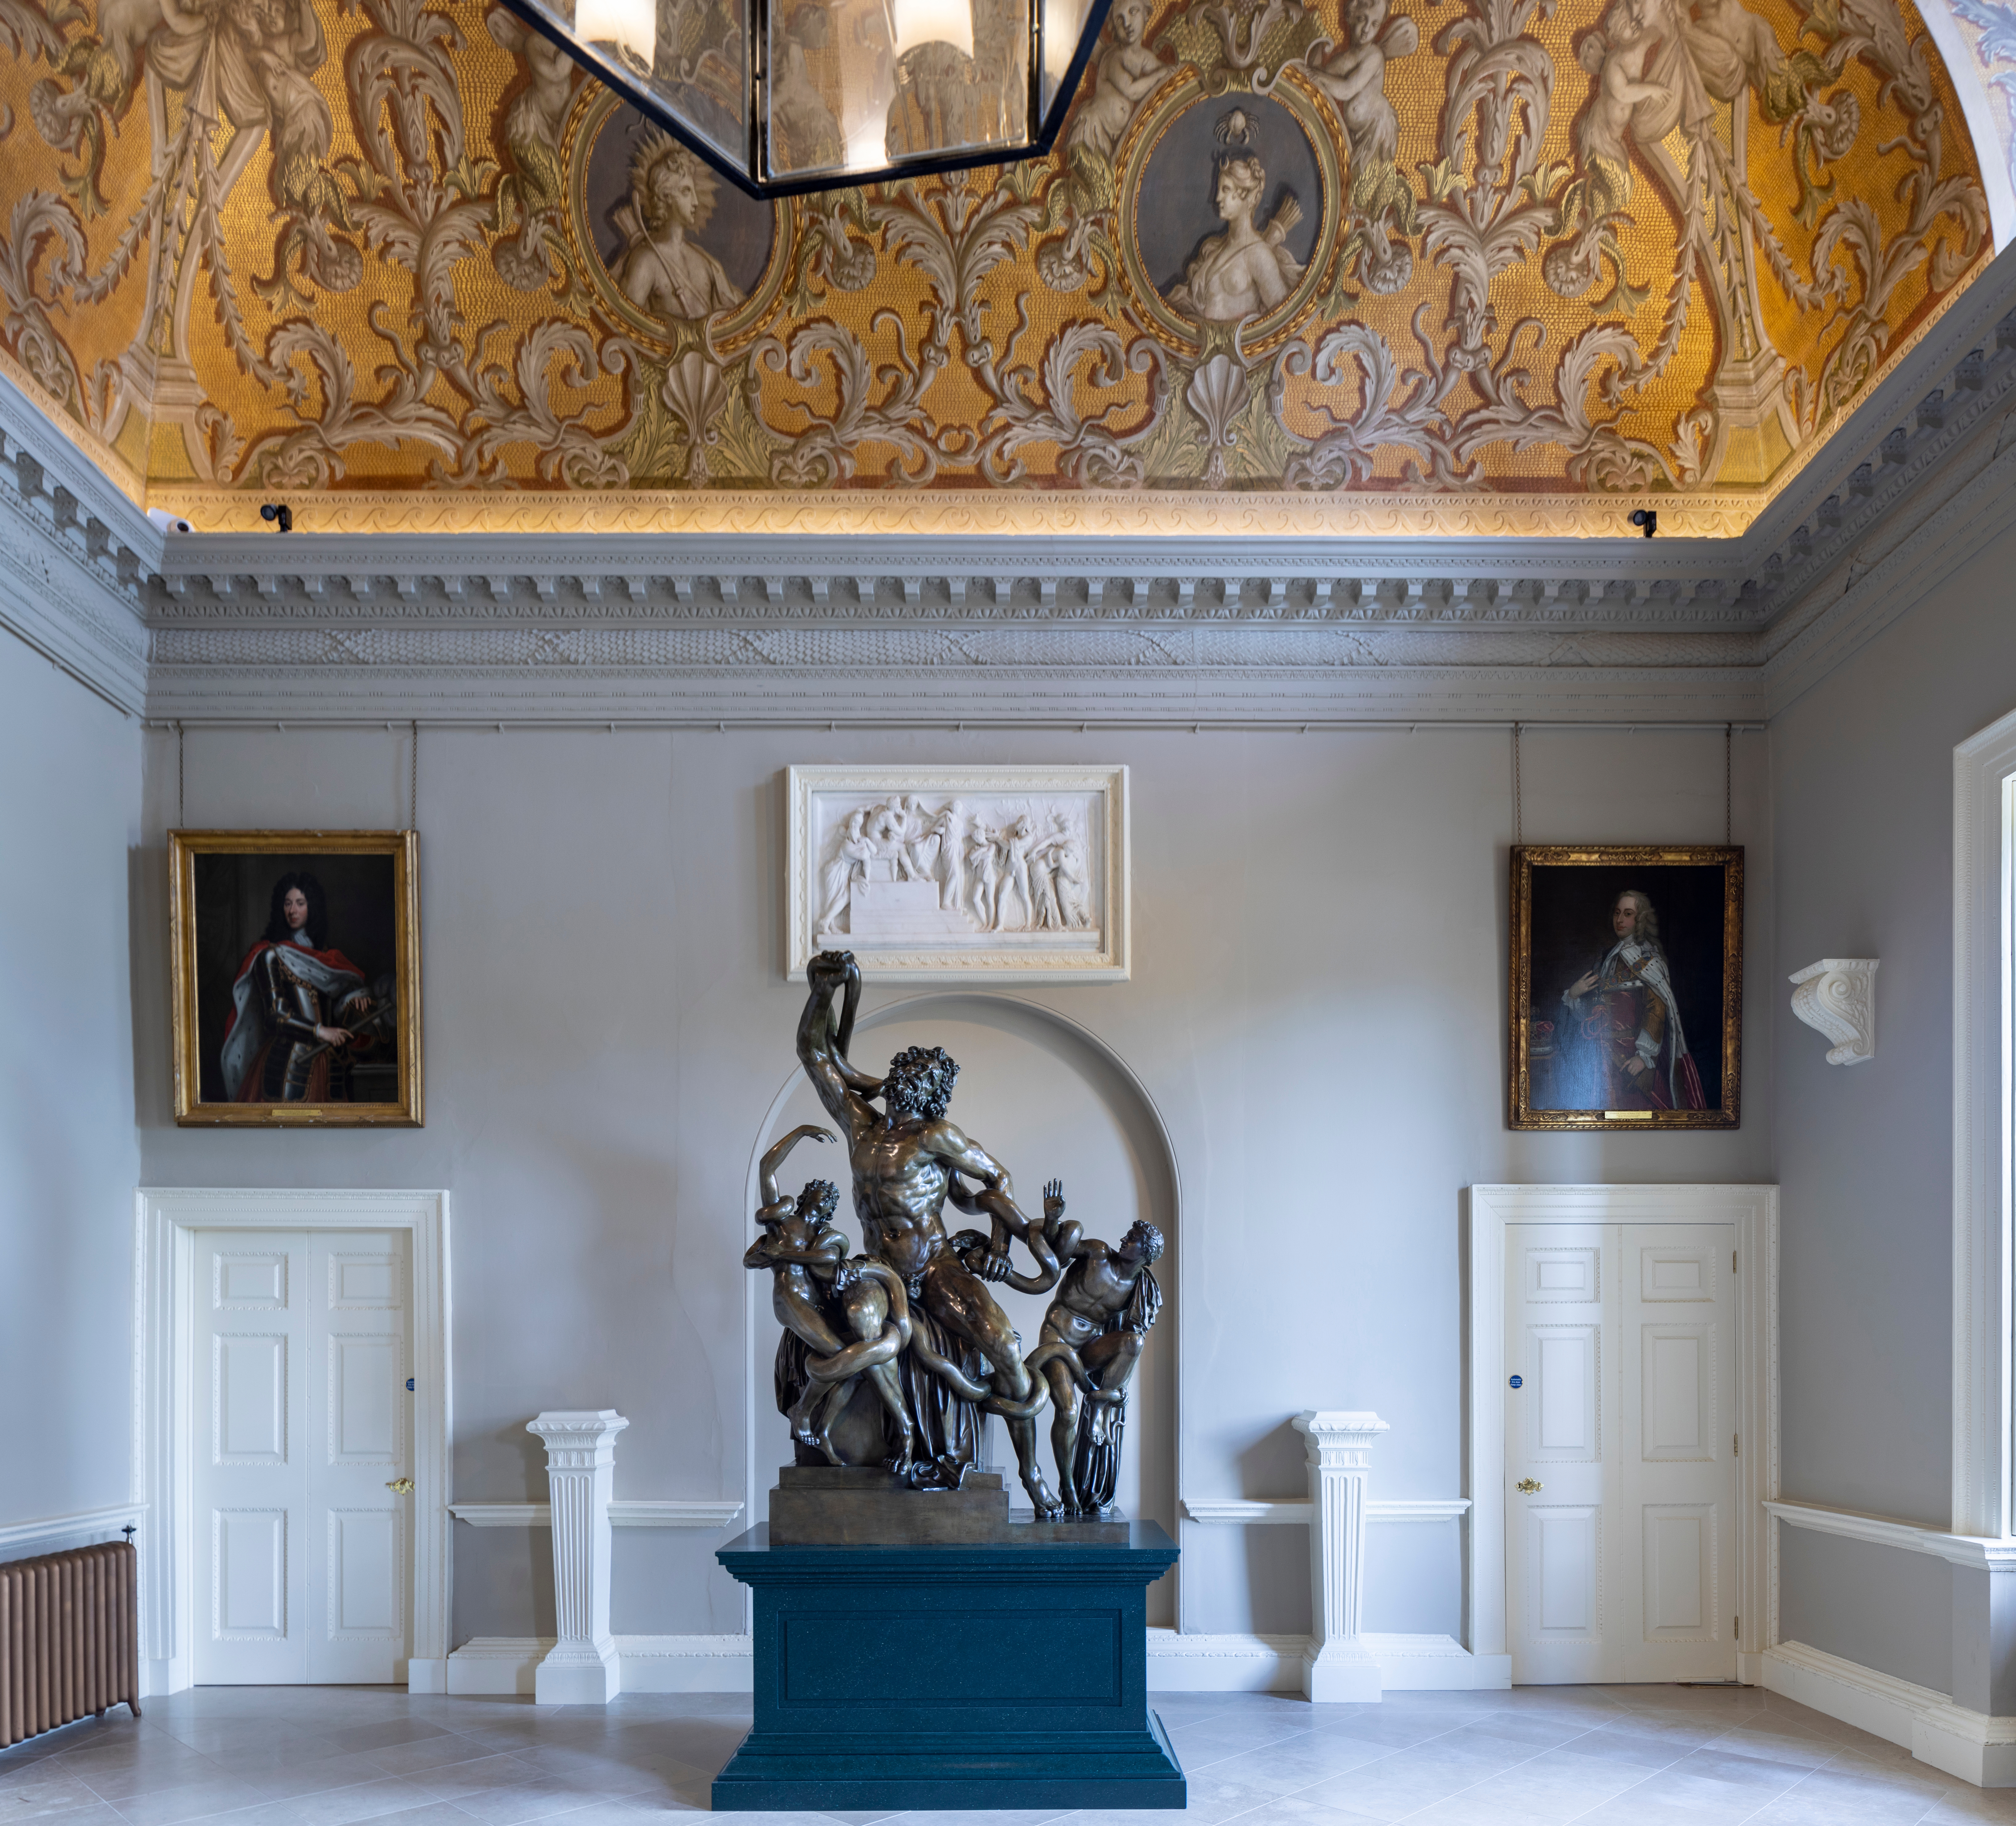 The Laocoön freshly installed. Photo by Andy Marshall.